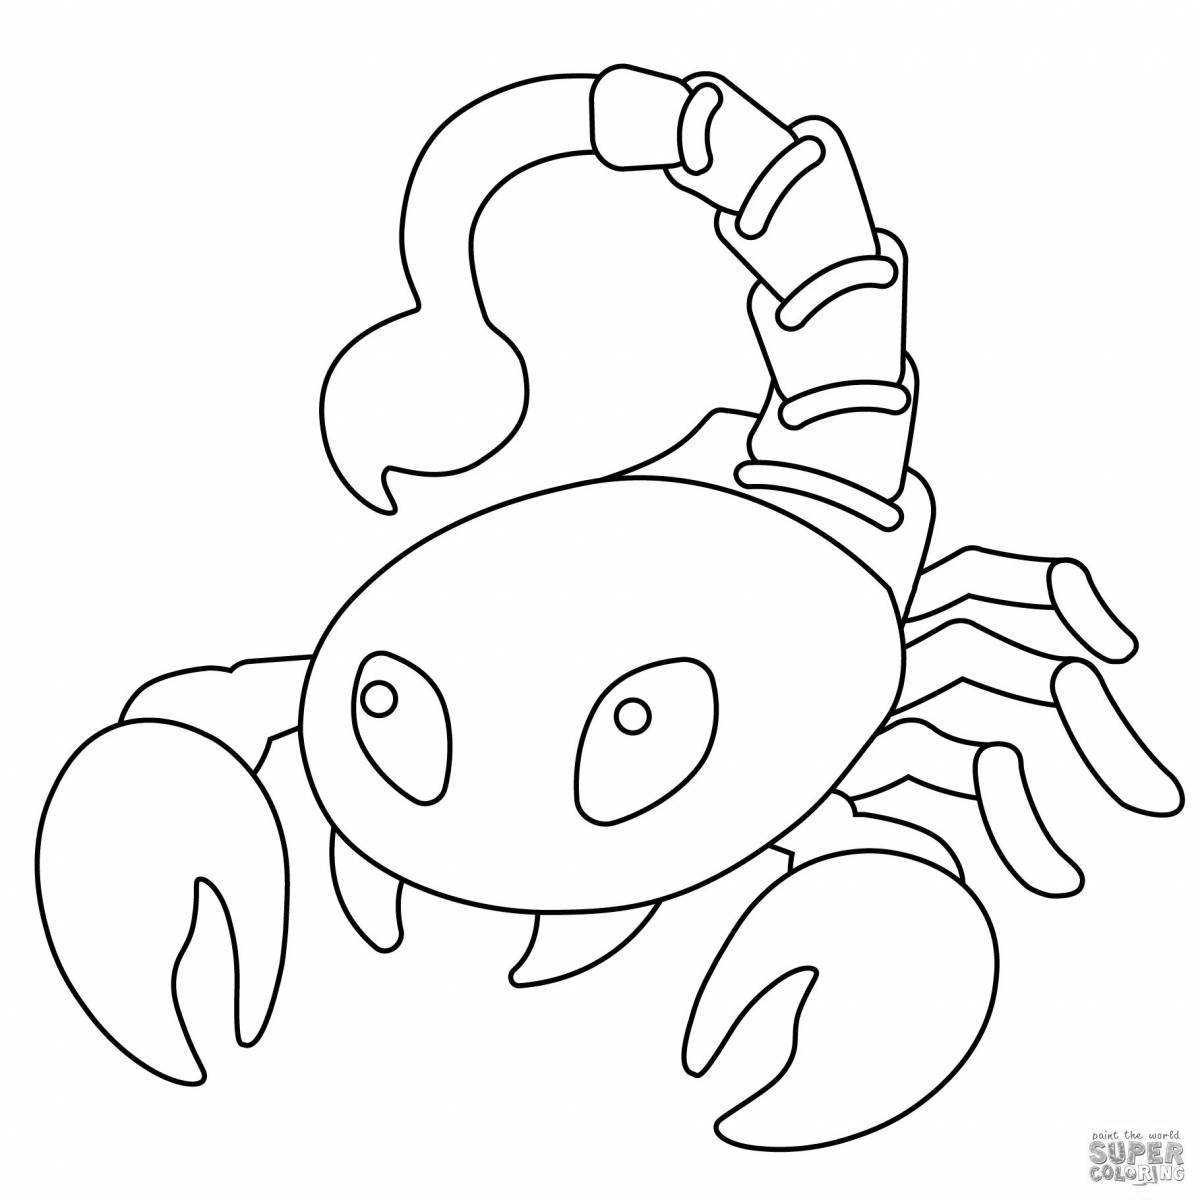 Great scorpion coloring book for kids